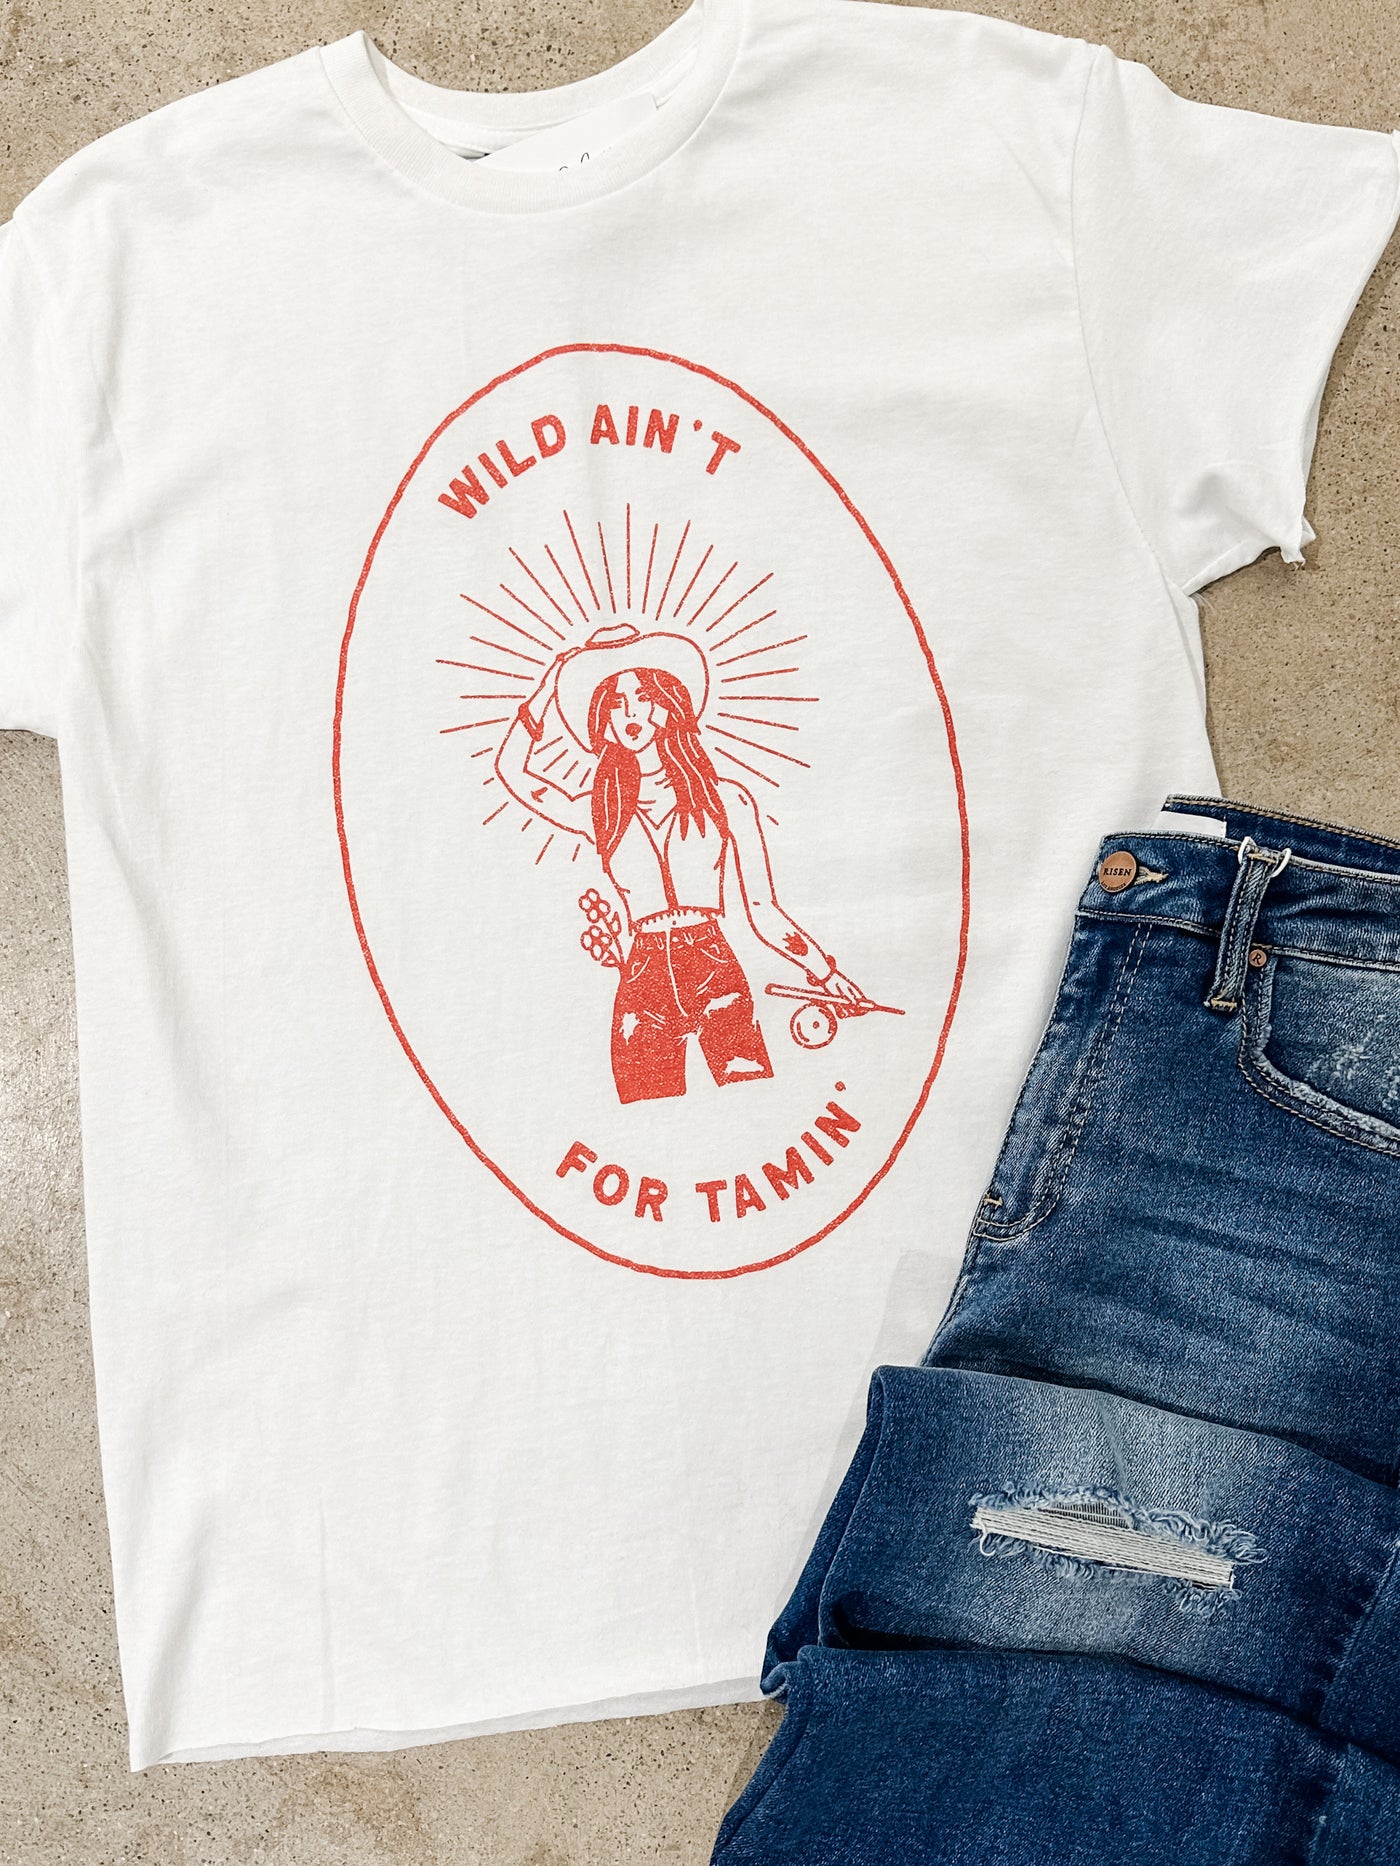 Wild Ain't For Tamin' Graphic Tee